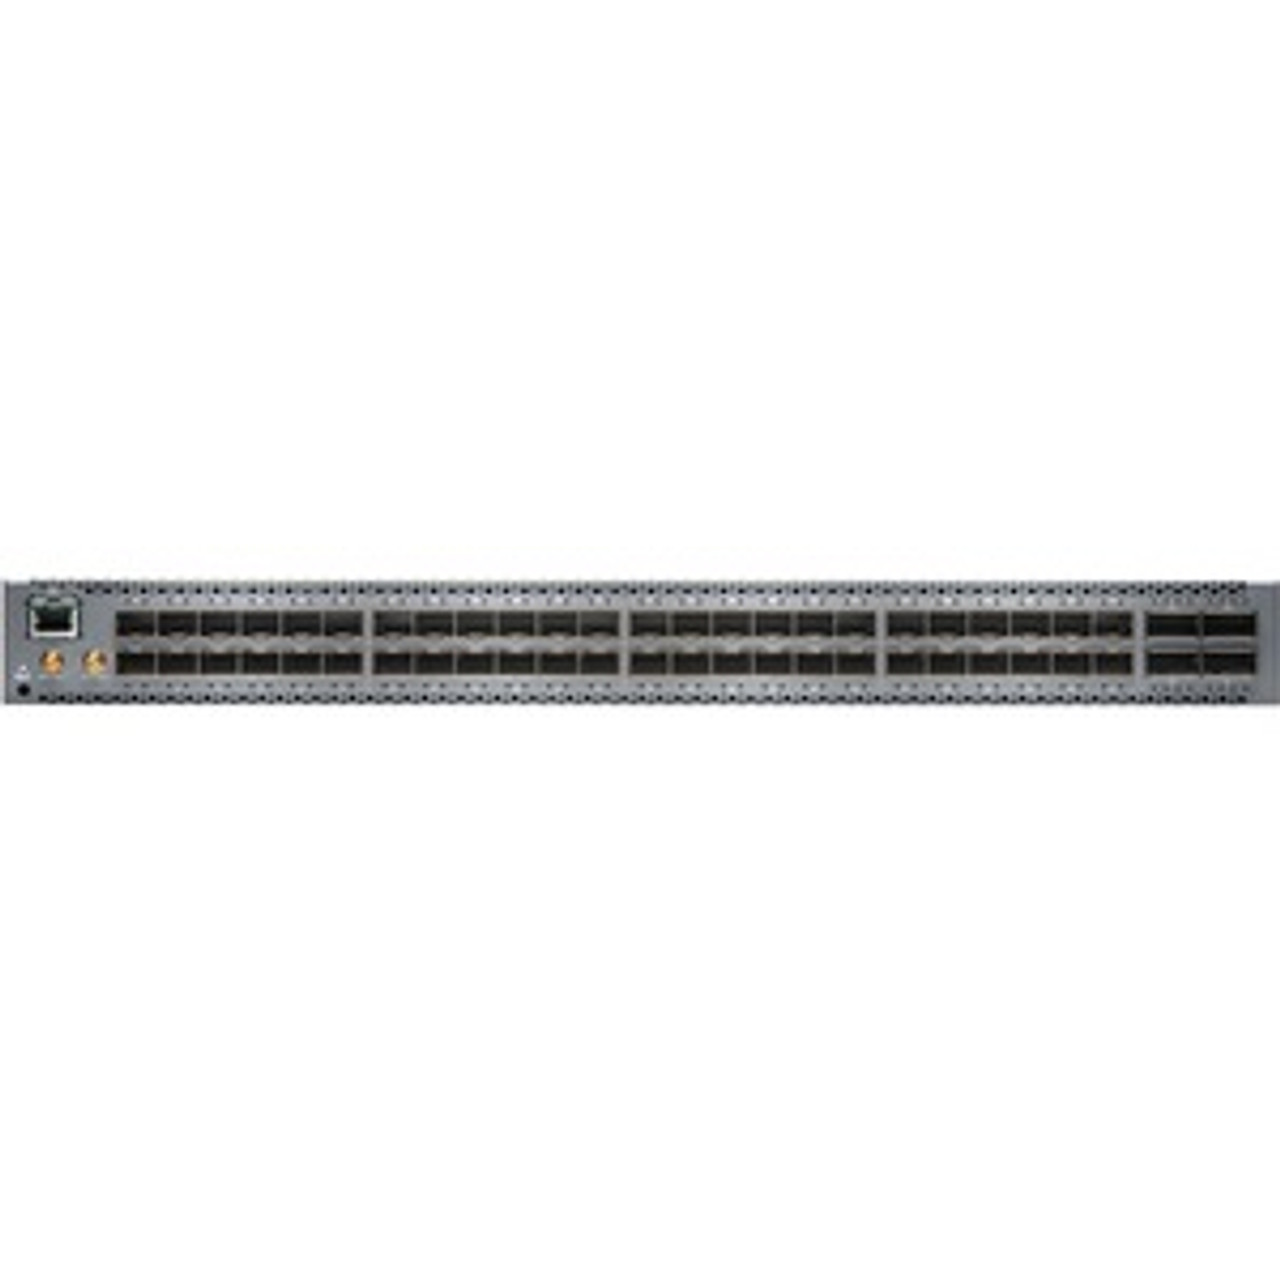 Juniper QFX5110-48S Ethernet Switch - Manageable - TAA Compliant - 3 Layer Supported - Modular - 300 W Power Consumption - Optical Fiber - 1U High - Rack-mountable - 1 Year Limited   Mfr P/N QFX5110-48S-AFO-T2